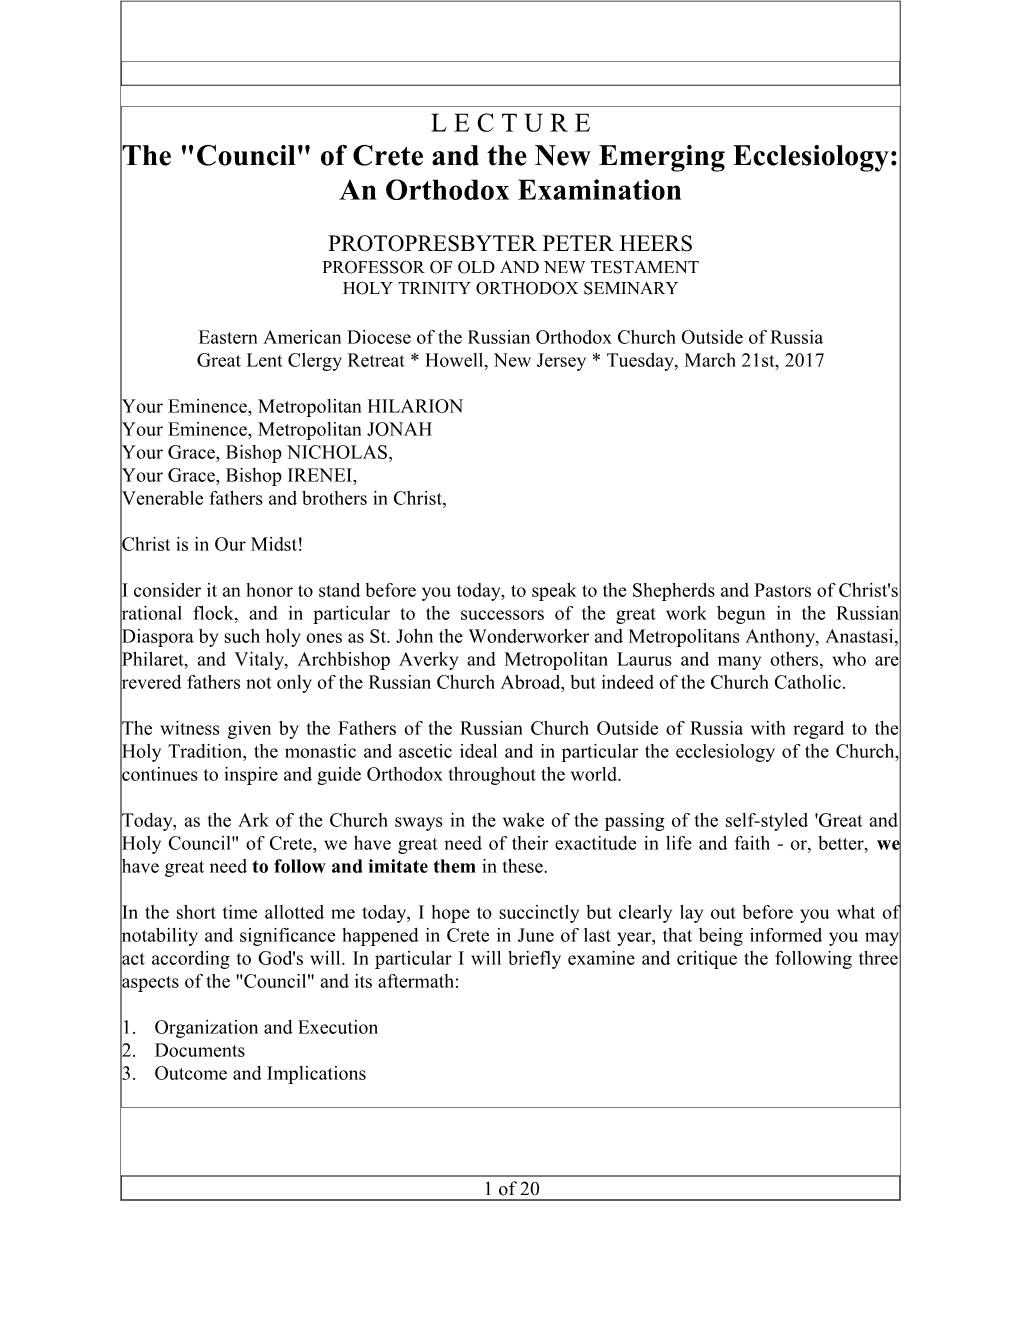 The Council of Crete and the New Emerging Ecclesiology: an Orthodox Examination